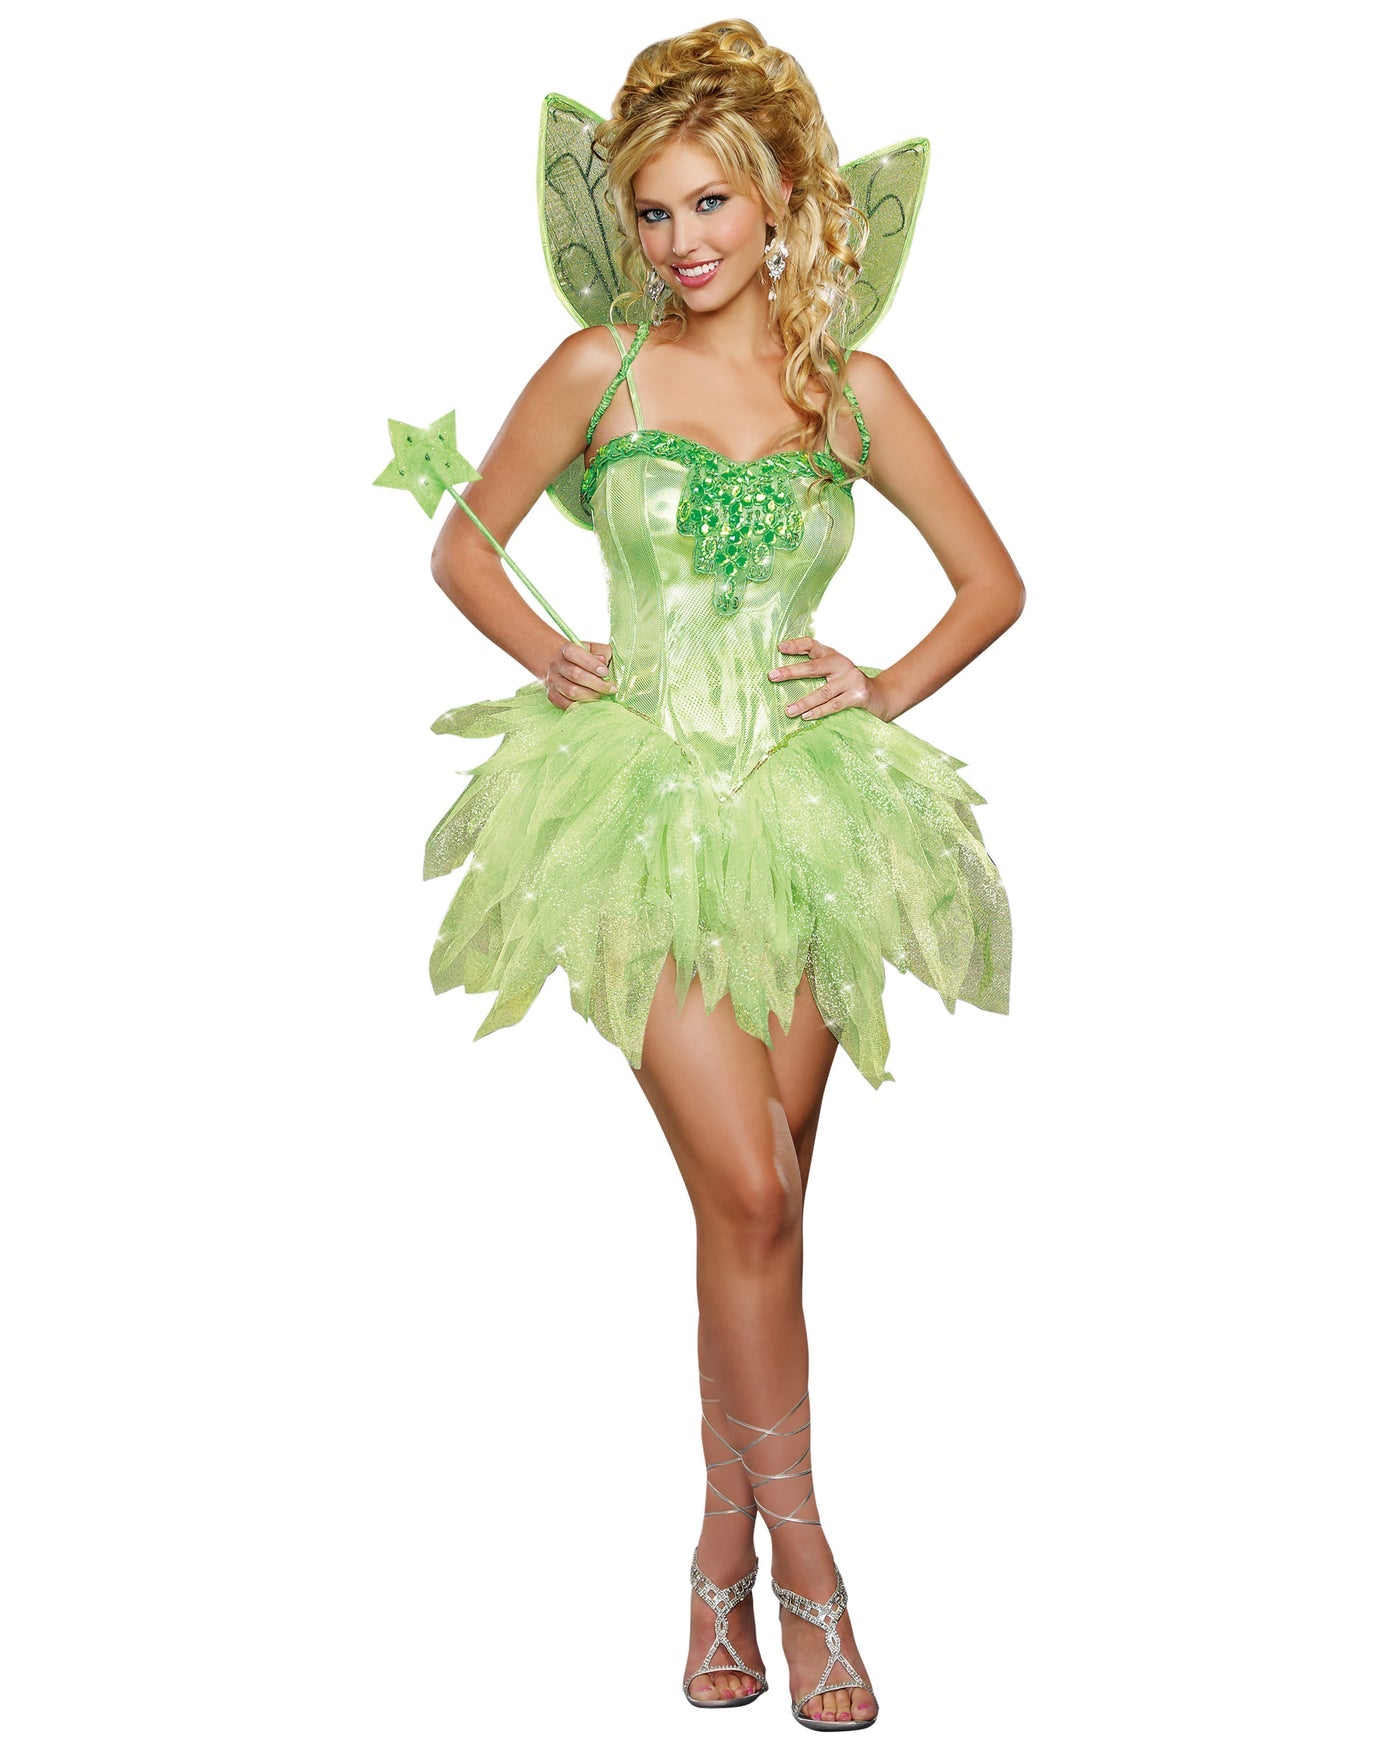 Fairy-Licious Costume for Adults